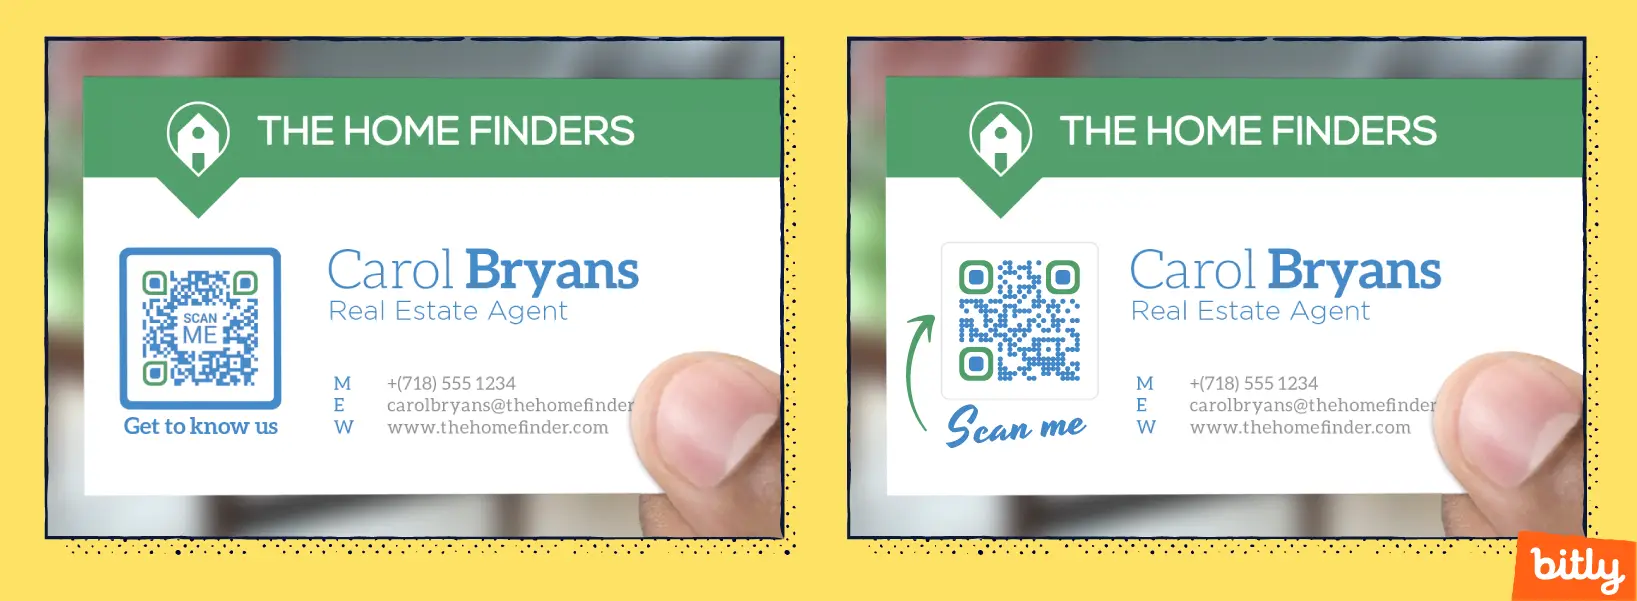 Two business cards side by side featuring two different QR Codes that are customized to A/B test the designs.